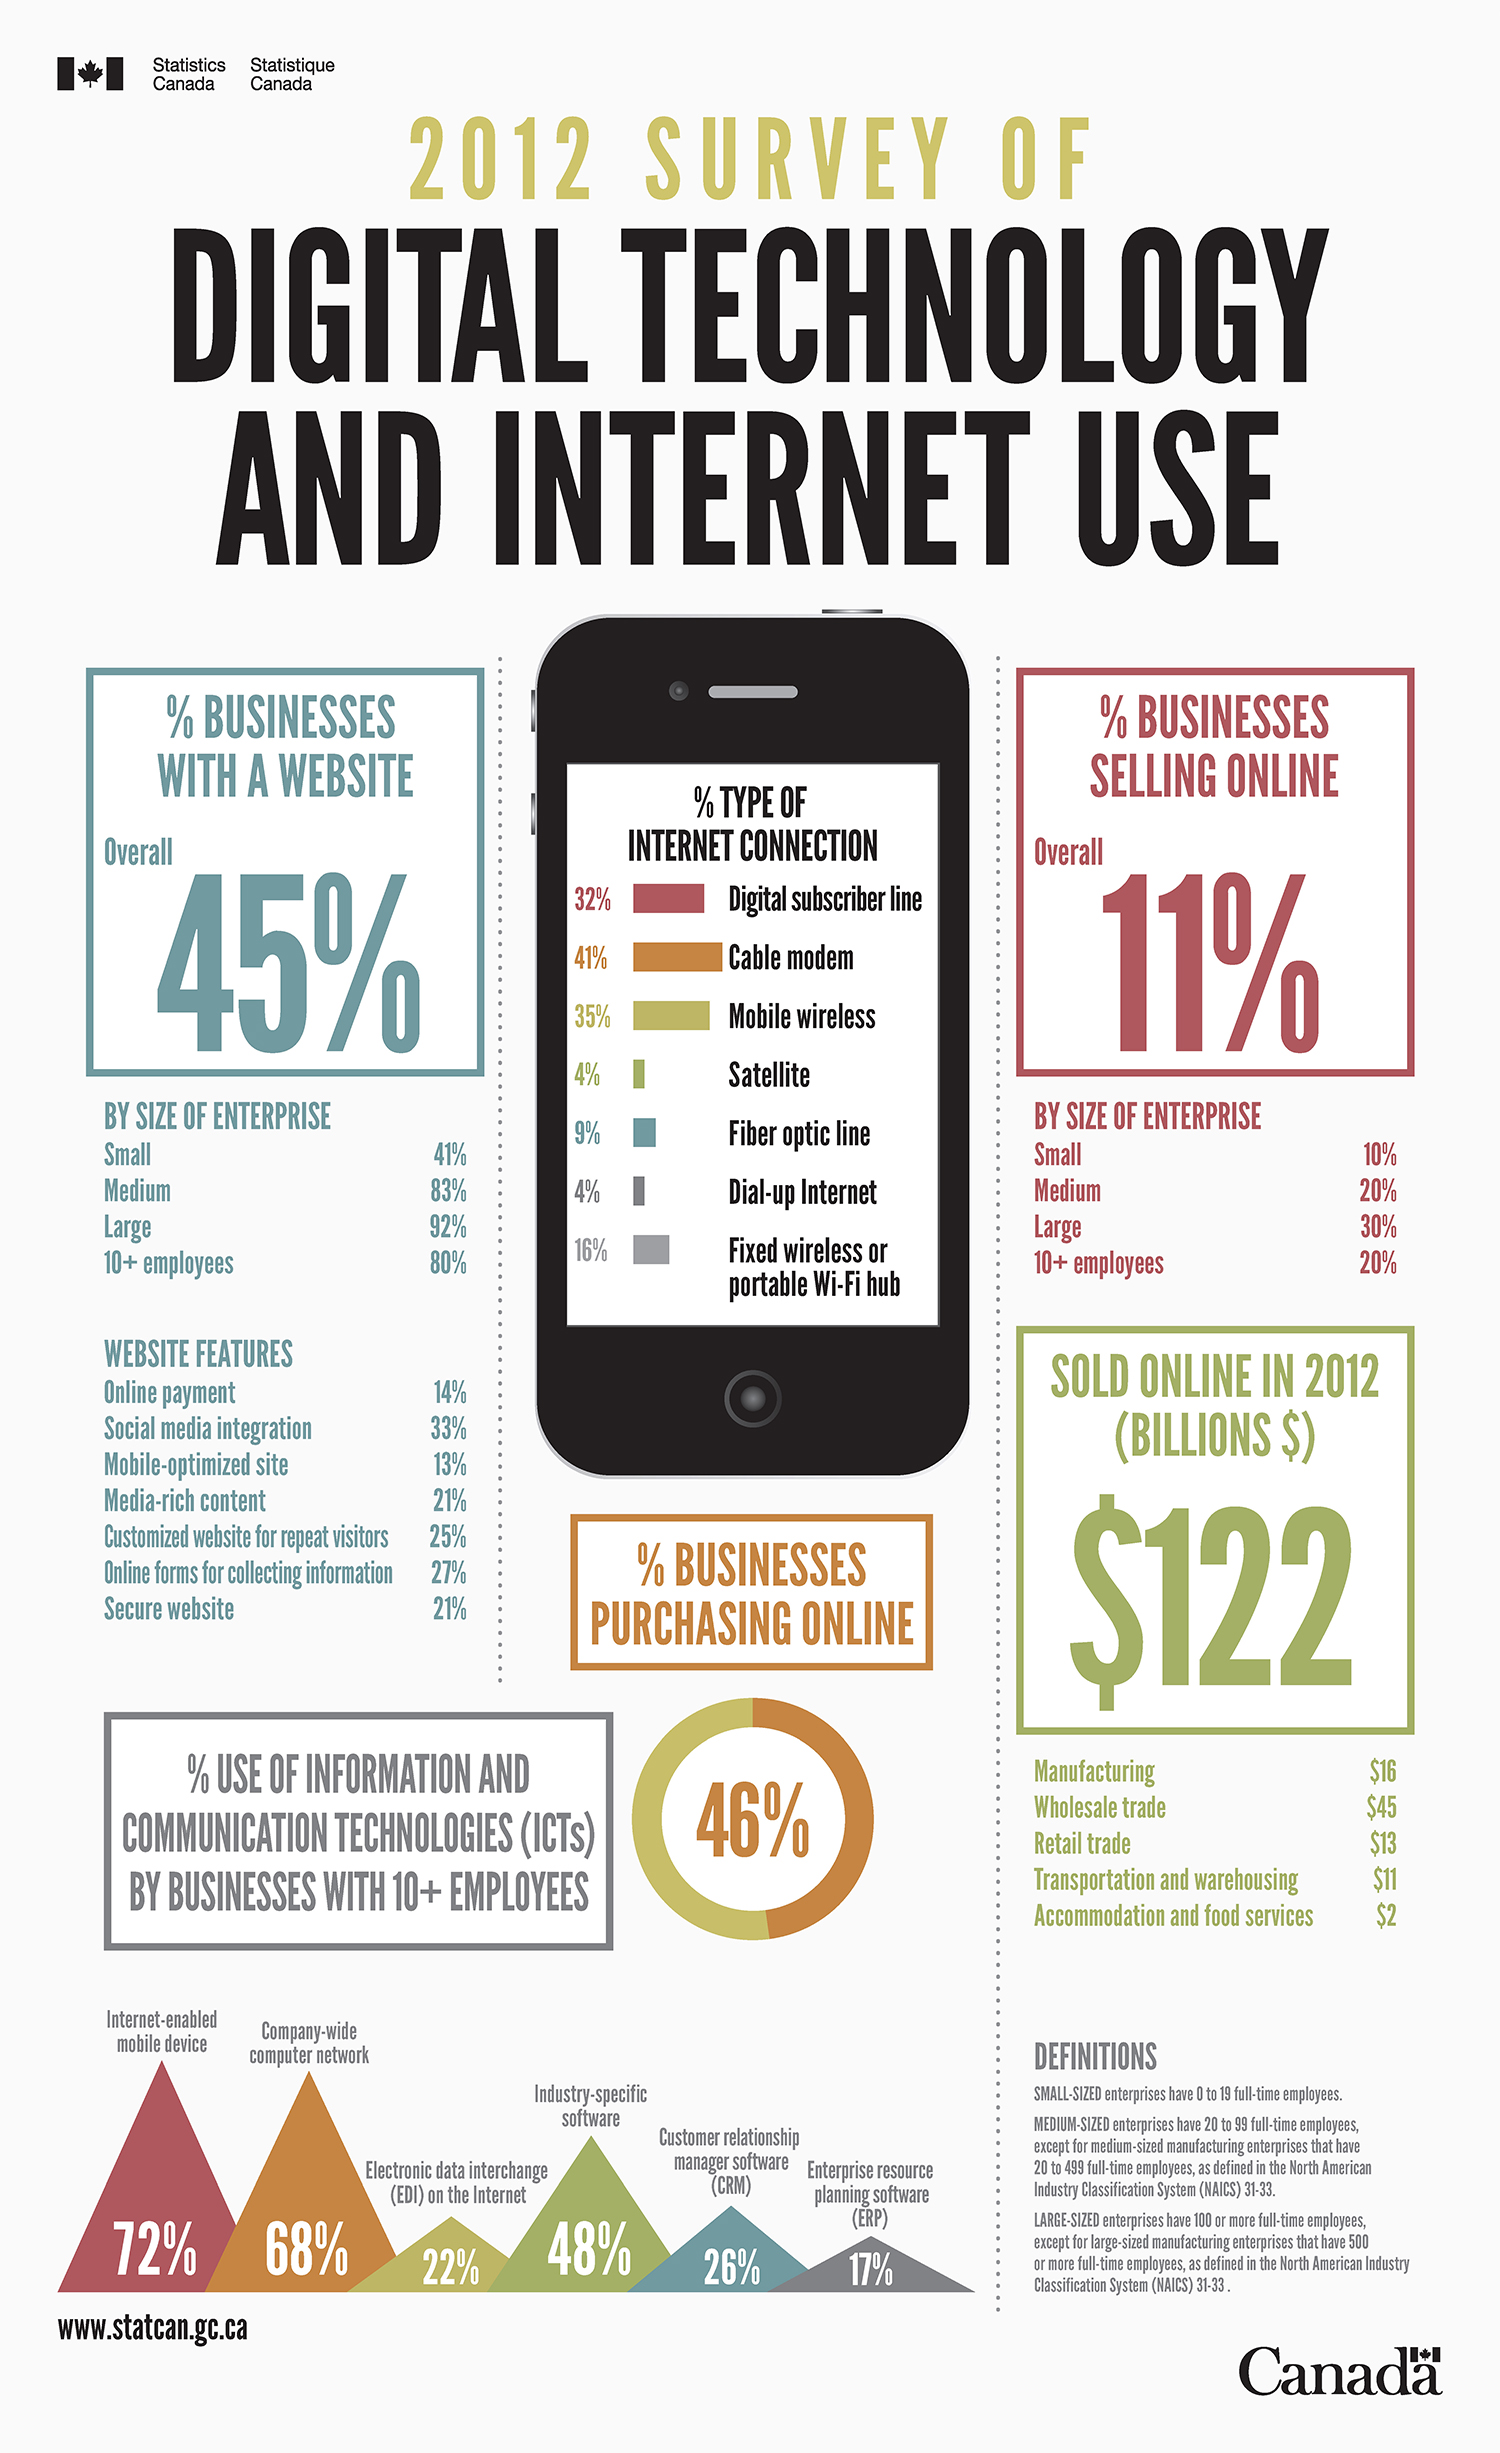 Infographic: 2012 Survey of Digital Technology and Internet Use